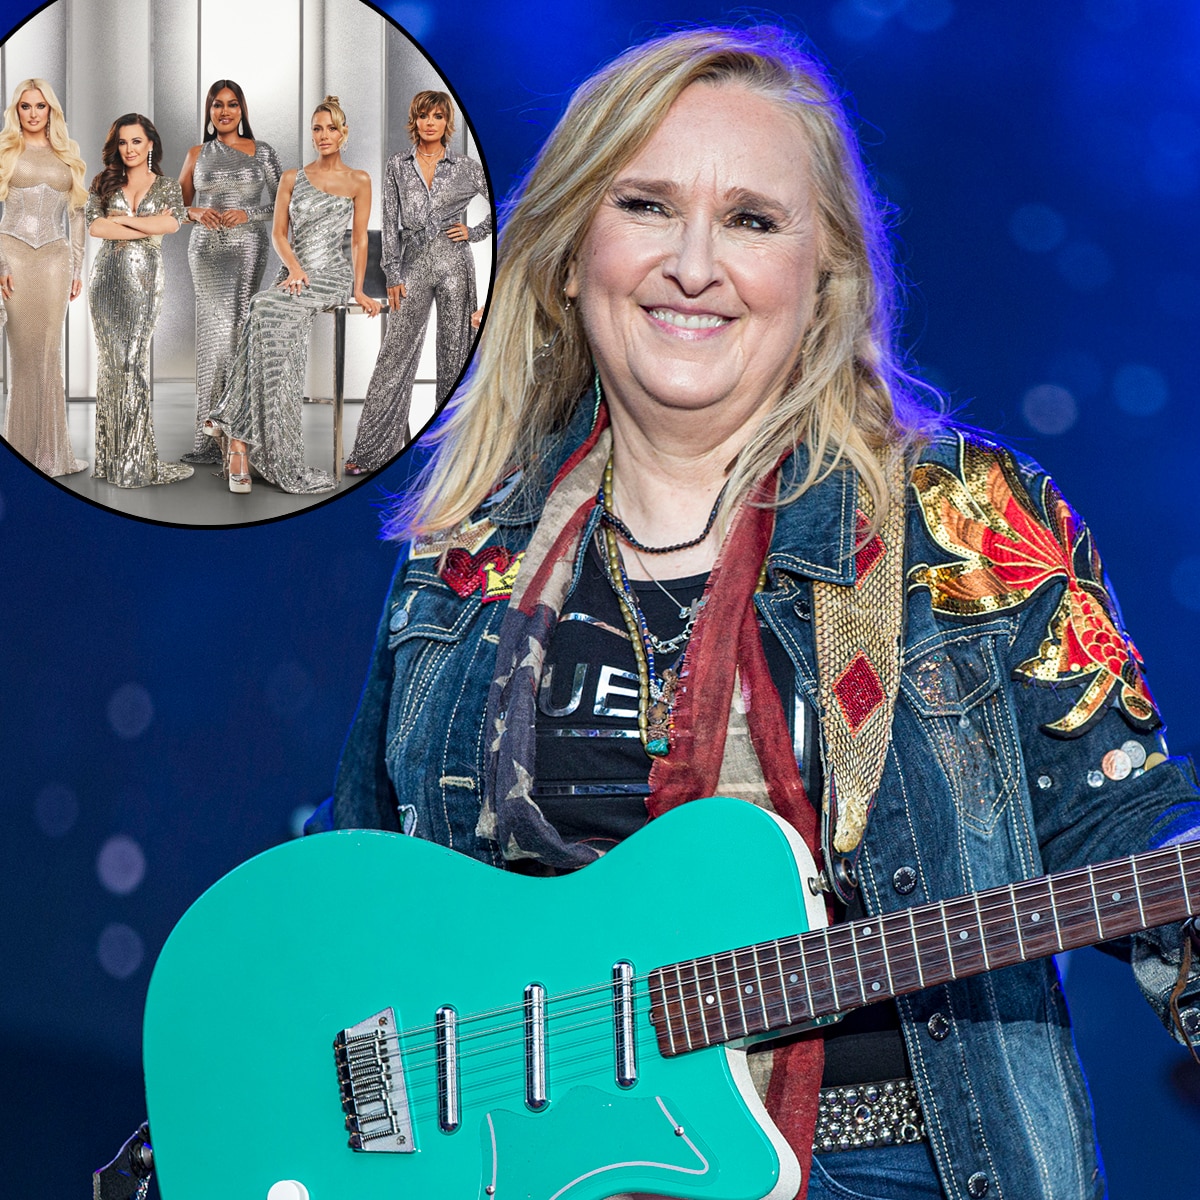 Melissa Etheridge, Real Housewives of Beverly Hills